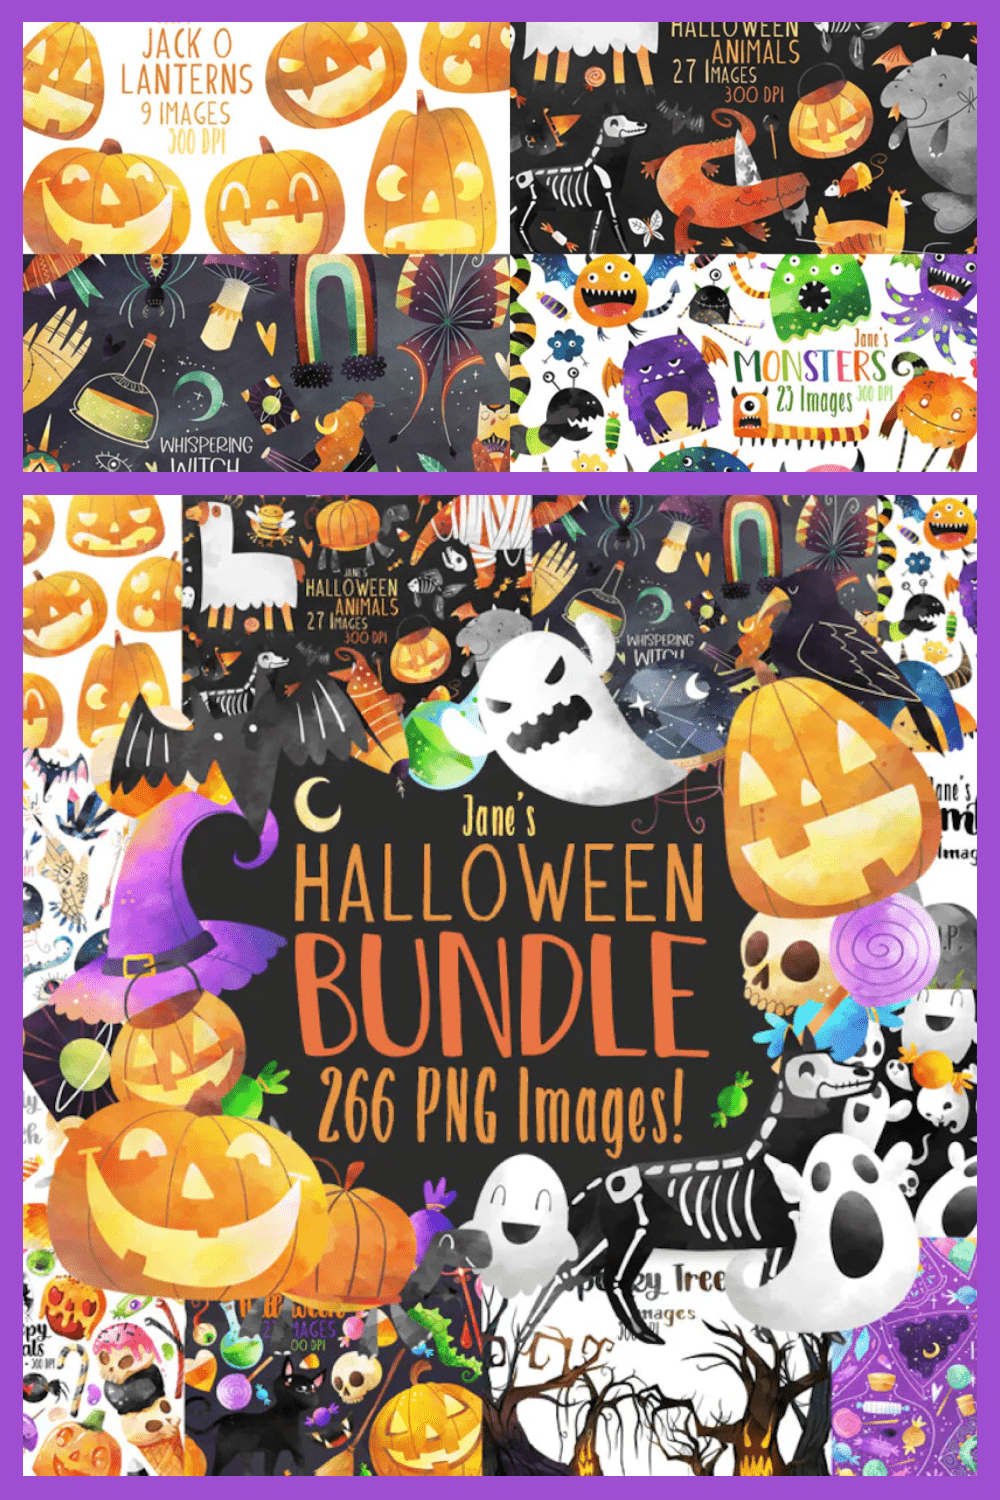 High-quality watercolor illustrations for Halloween that will add variety to your artwork.